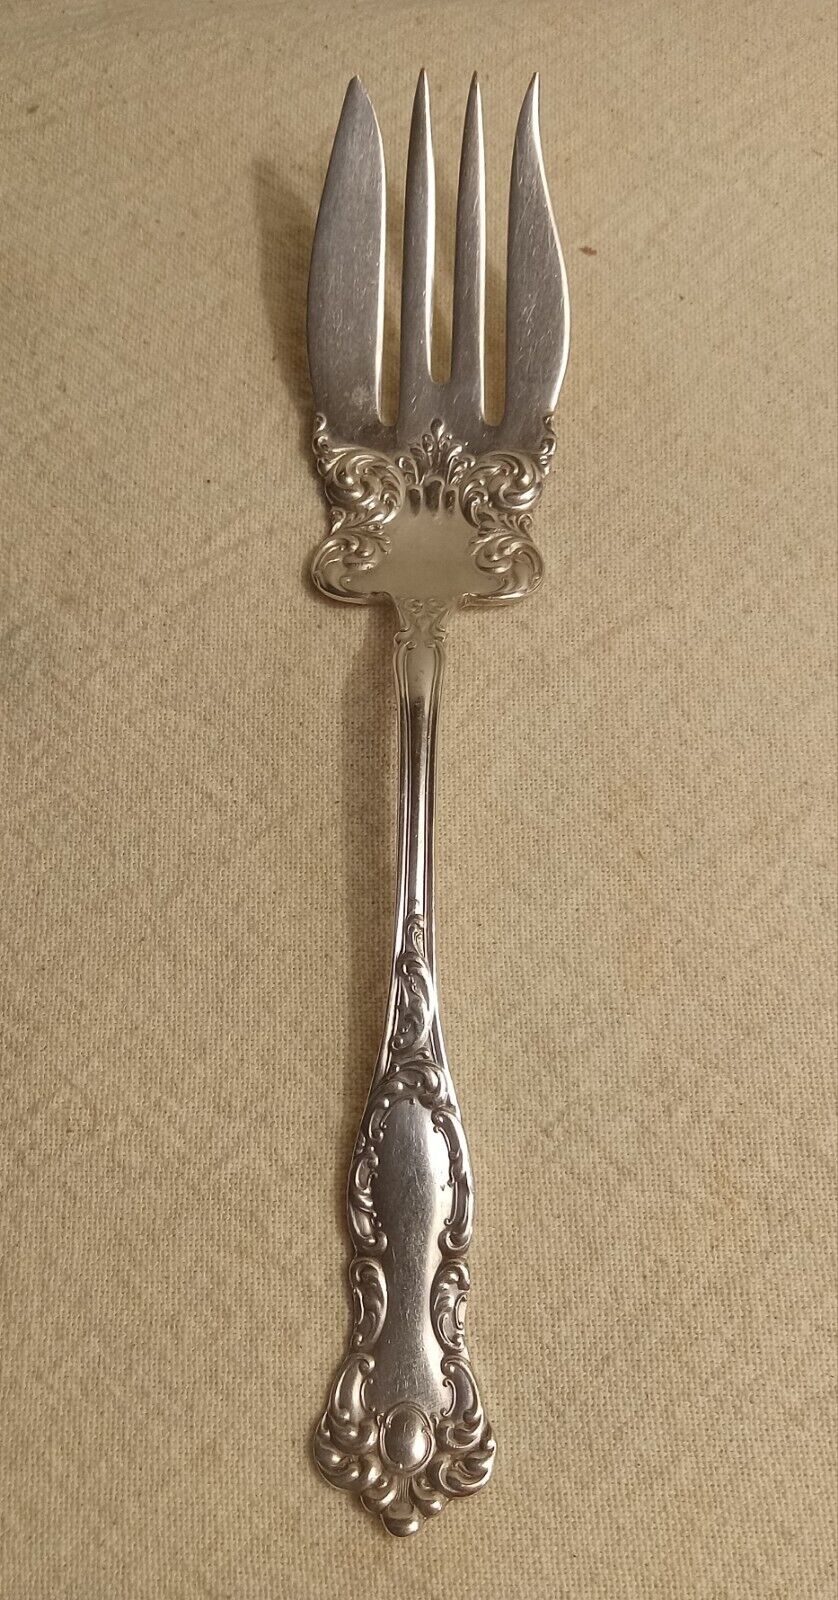 RARE Antique WM ROGERS & SON AA Victorian Oxford Pattern Cold Meat Fork 1901